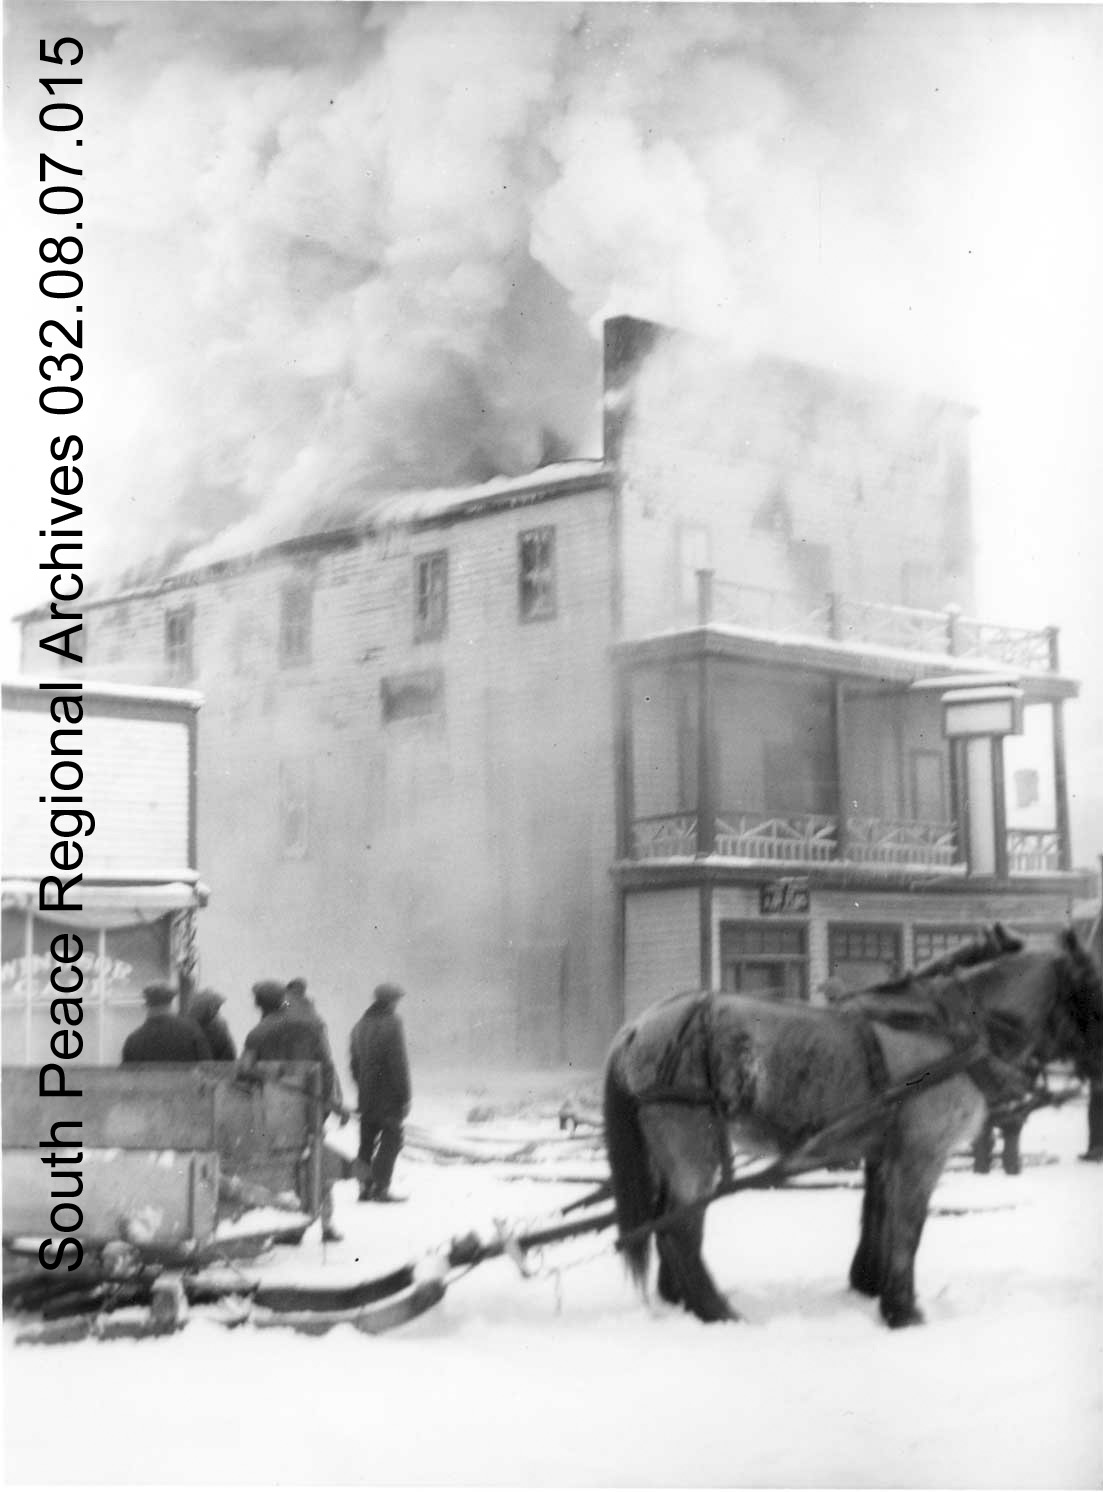 SPRA 0032.08.07.15: Corona Hotel. Early stages of the fire, taken from the street in front of the hotel. Horses, sleigh and men in foreground, February 1936. 